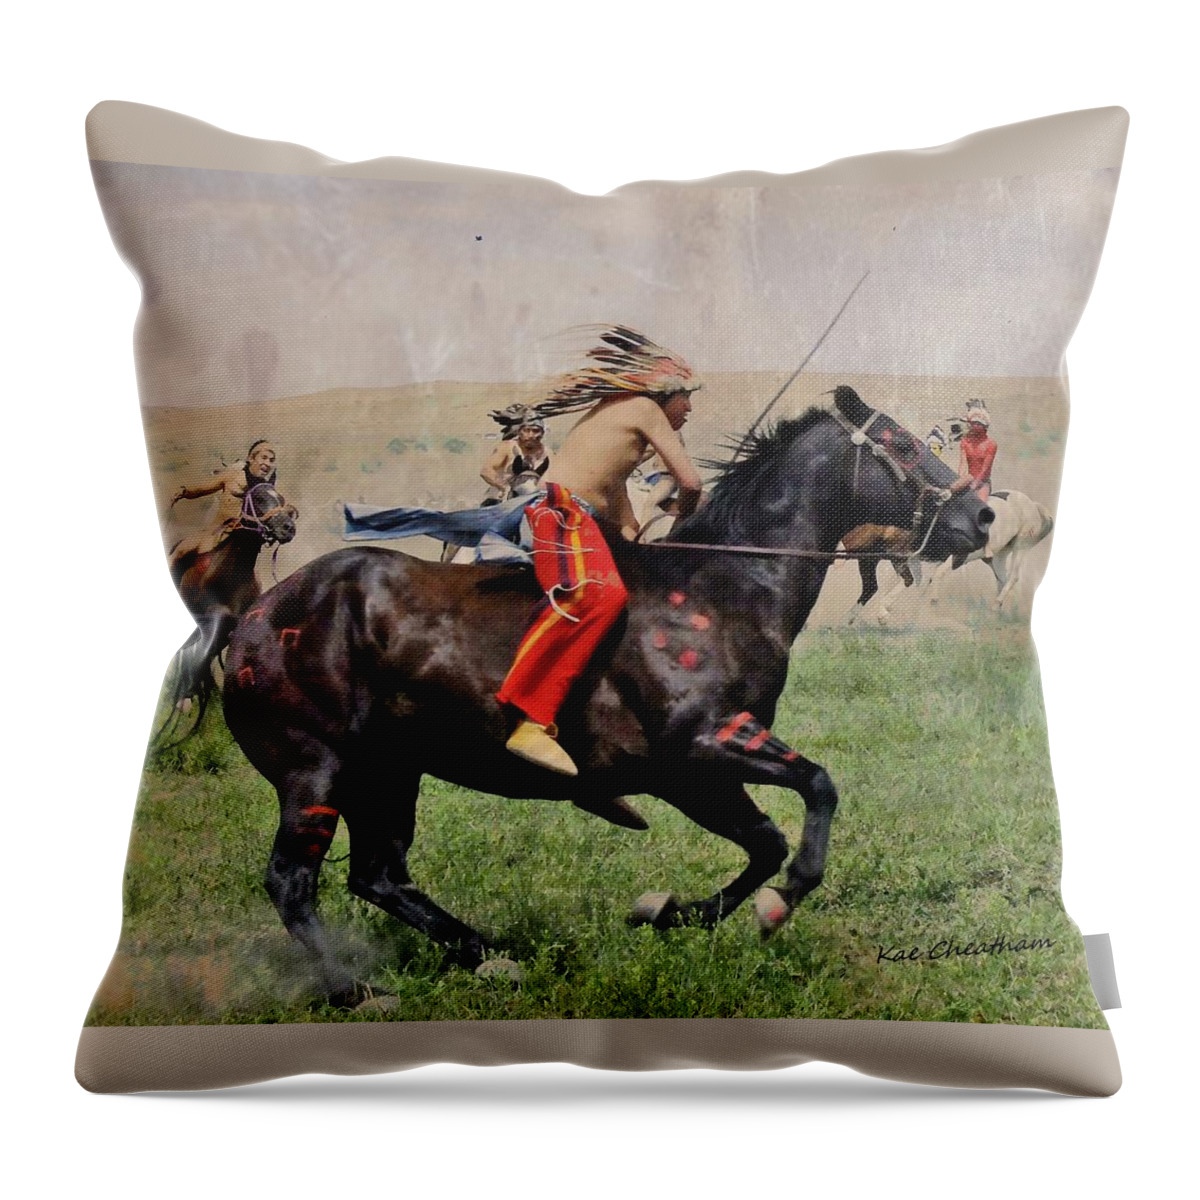 American Indian Throw Pillow featuring the mixed media Little BigHorn Reenactment 1 by Kae Cheatham